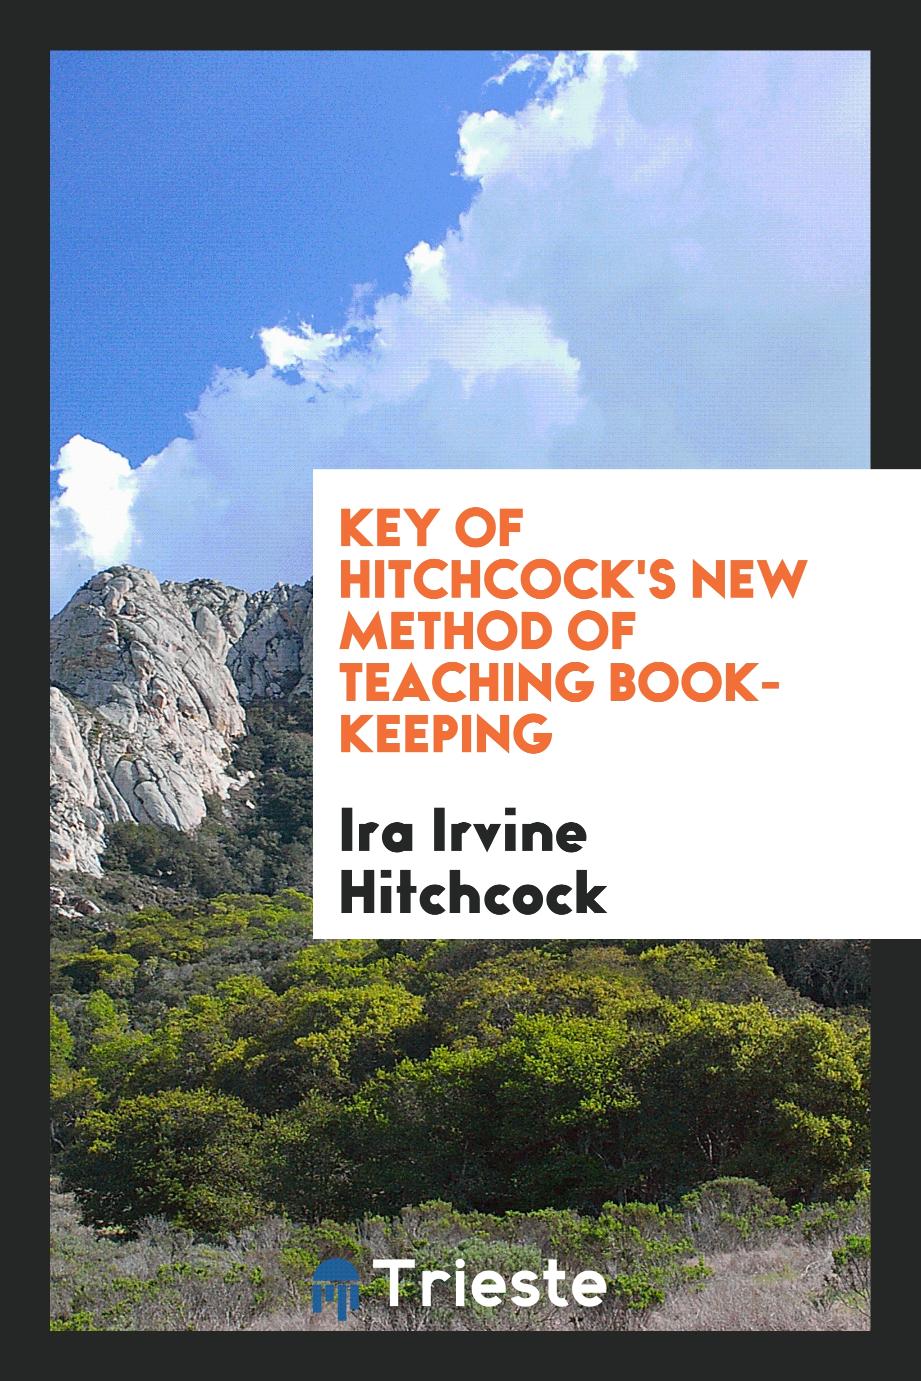 Key of Hitchcock's New Method of Teaching Book-keeping